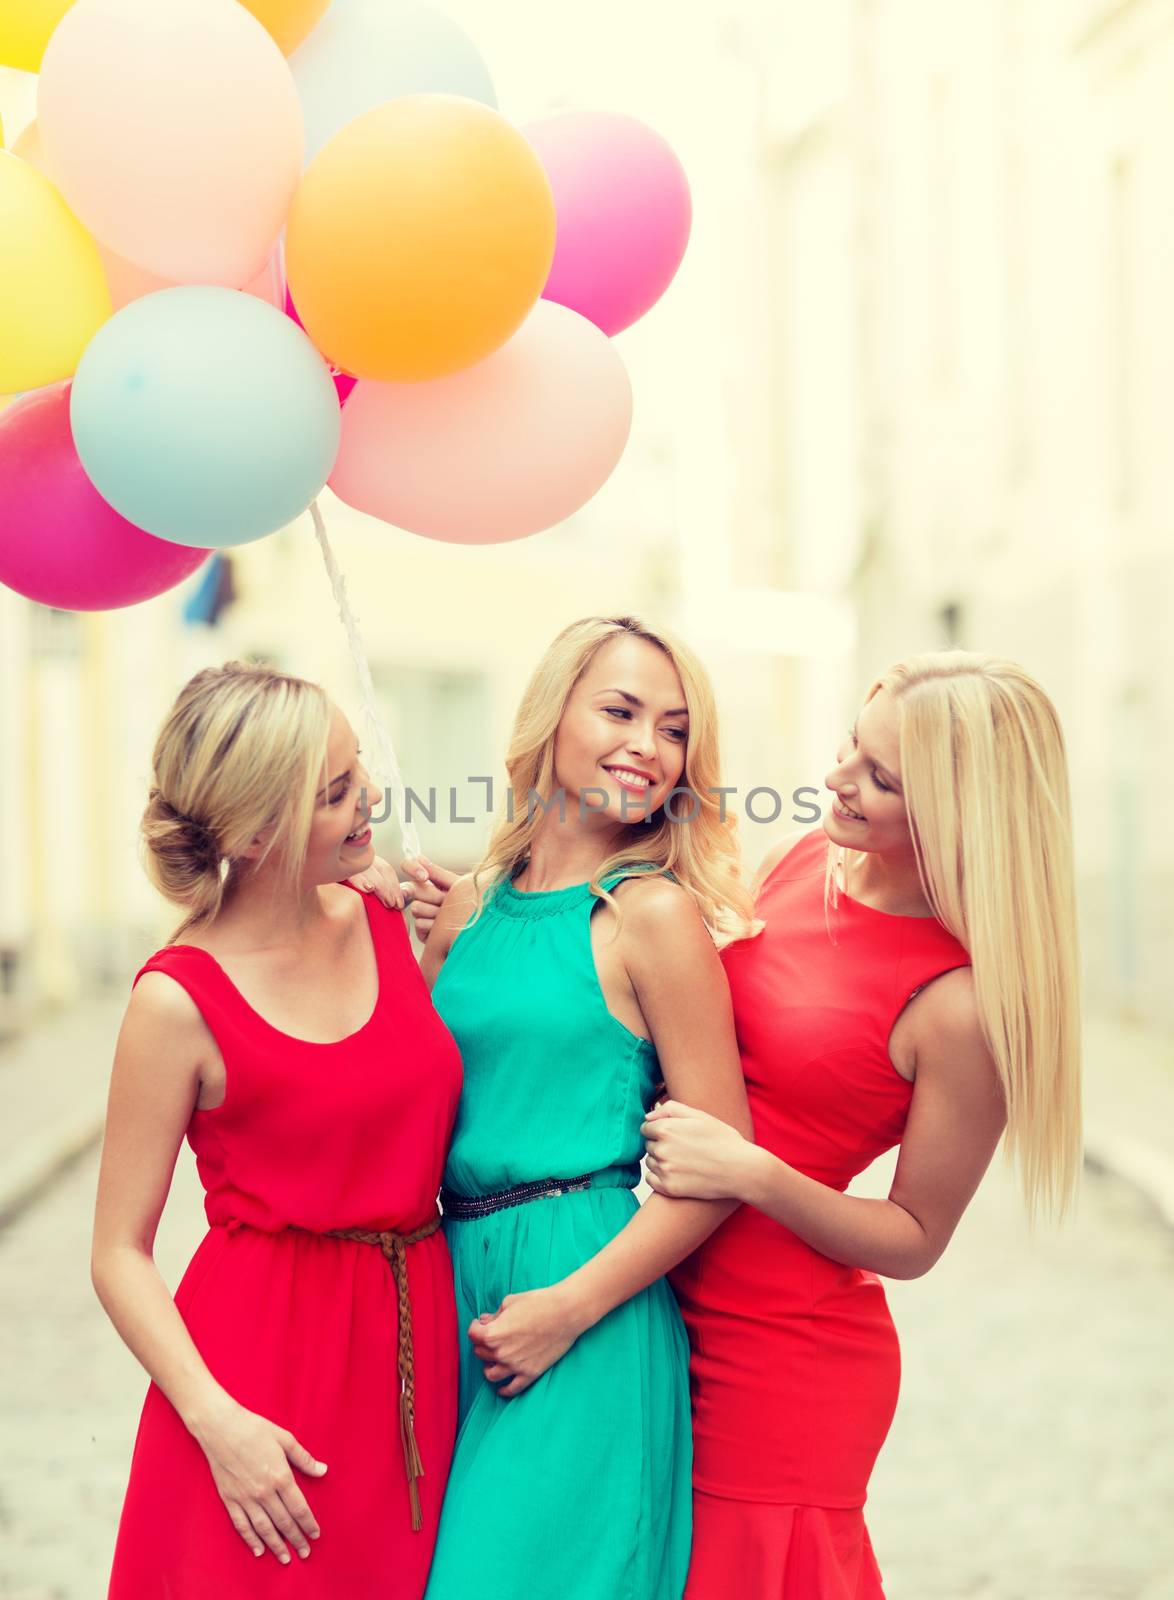 celebration and happy people concept - beautiful girls with colorful balloons in the city